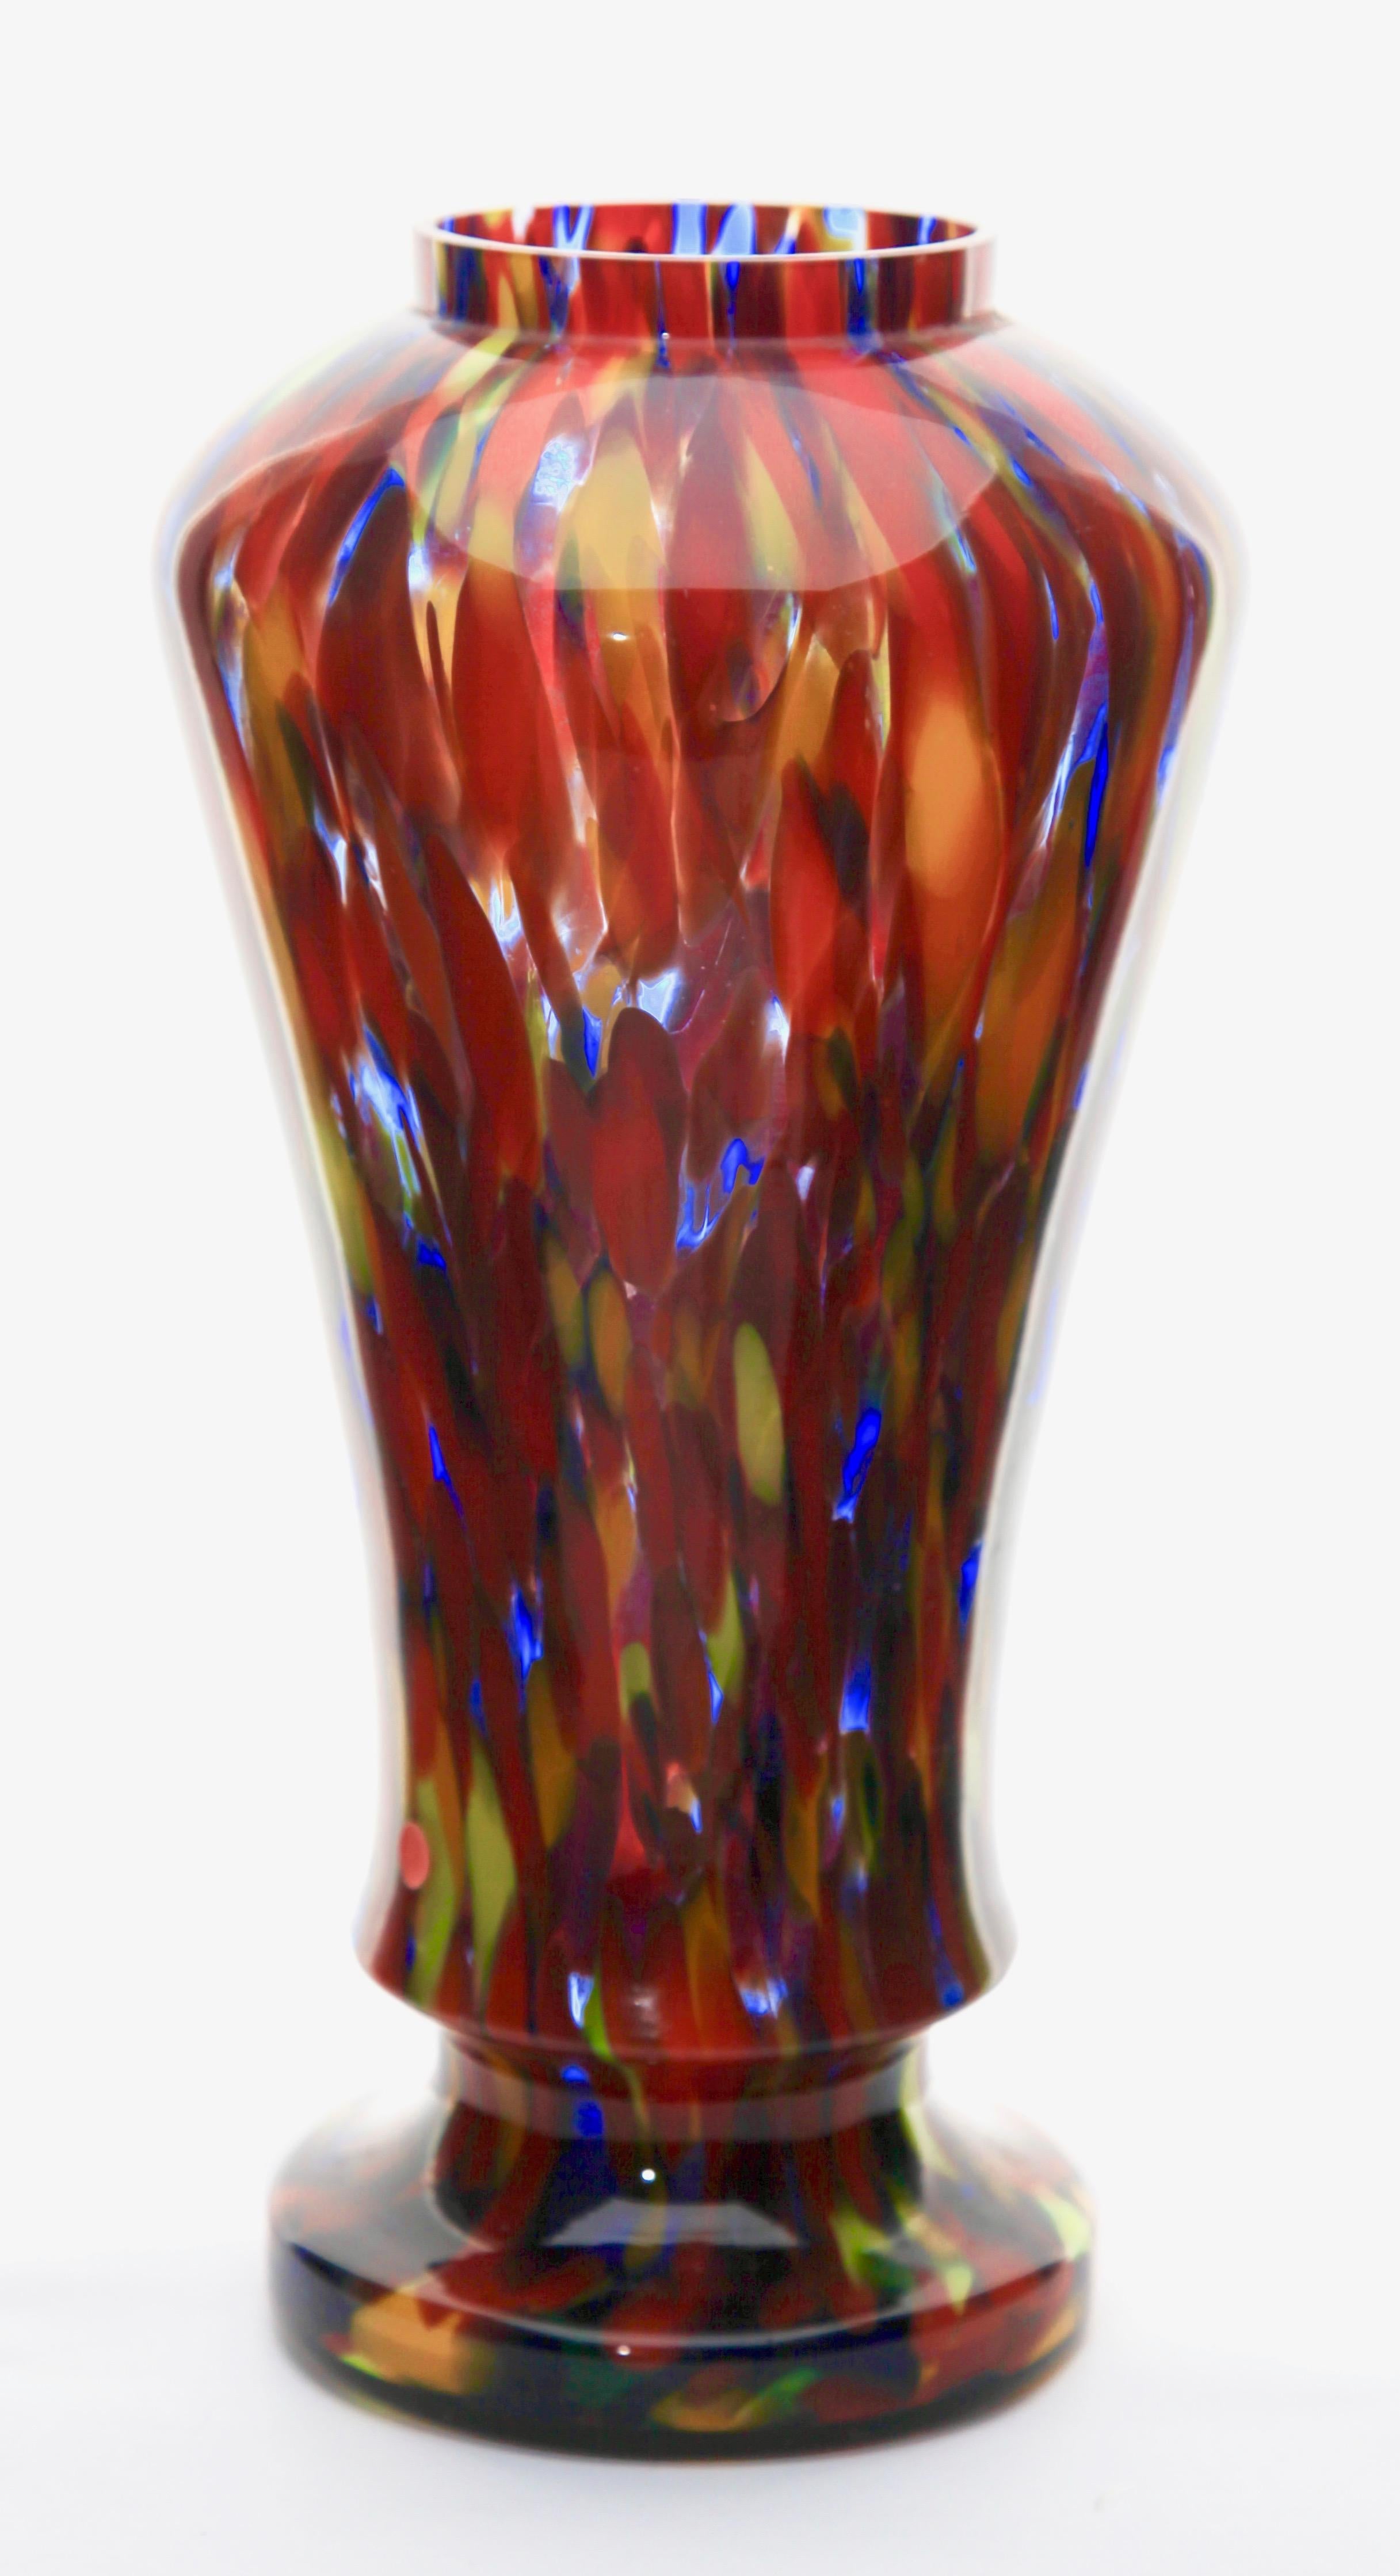 Baluster vase decorated with multicolored spatter glass (